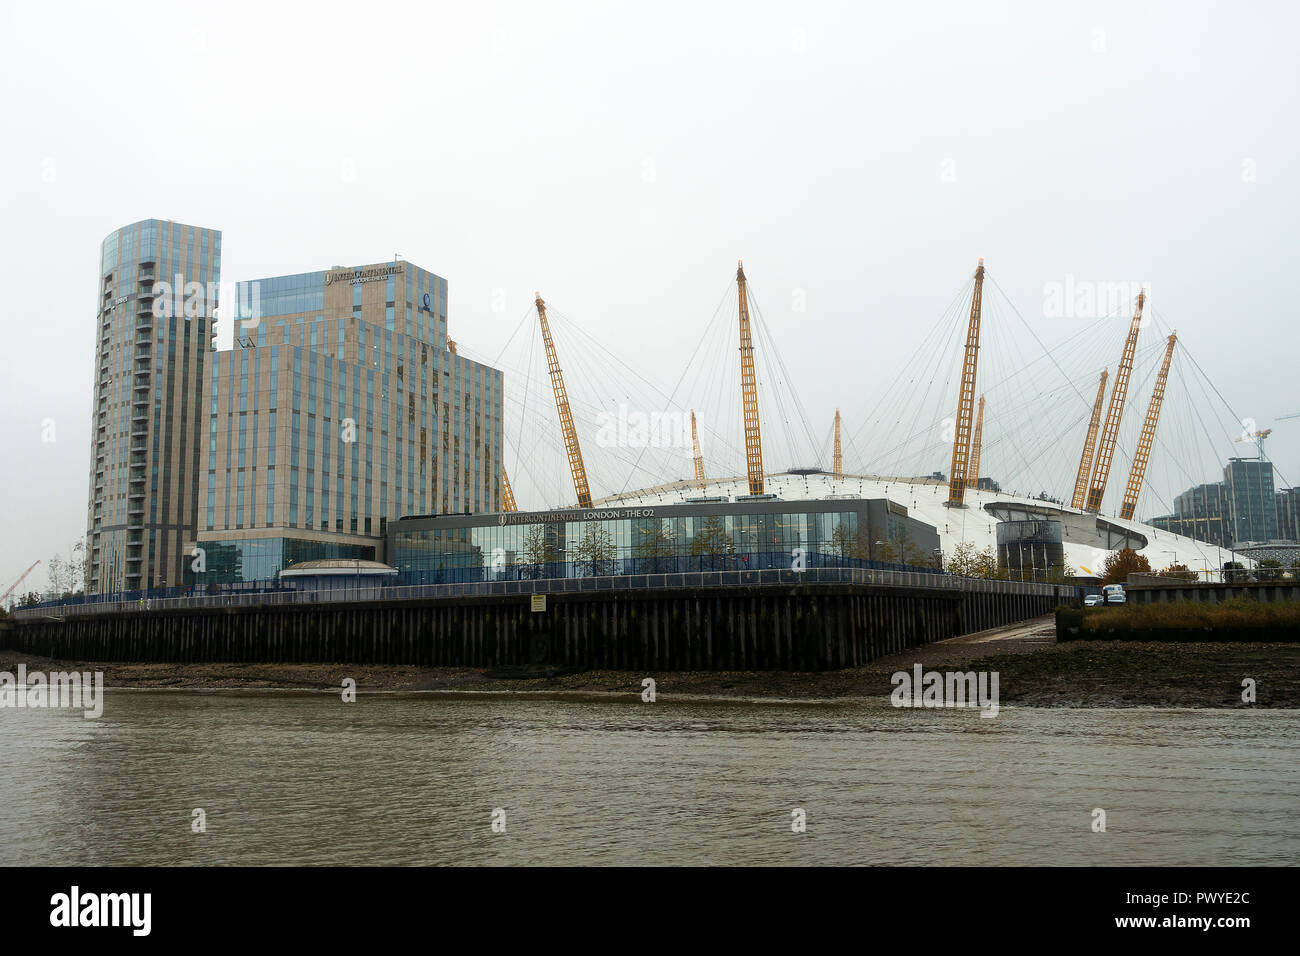 The Millennium Dome now known as The O2 Arena on the Bank of the River Thames on the Greenwich Peninsula South East London United Kingdom UK Stock Photo